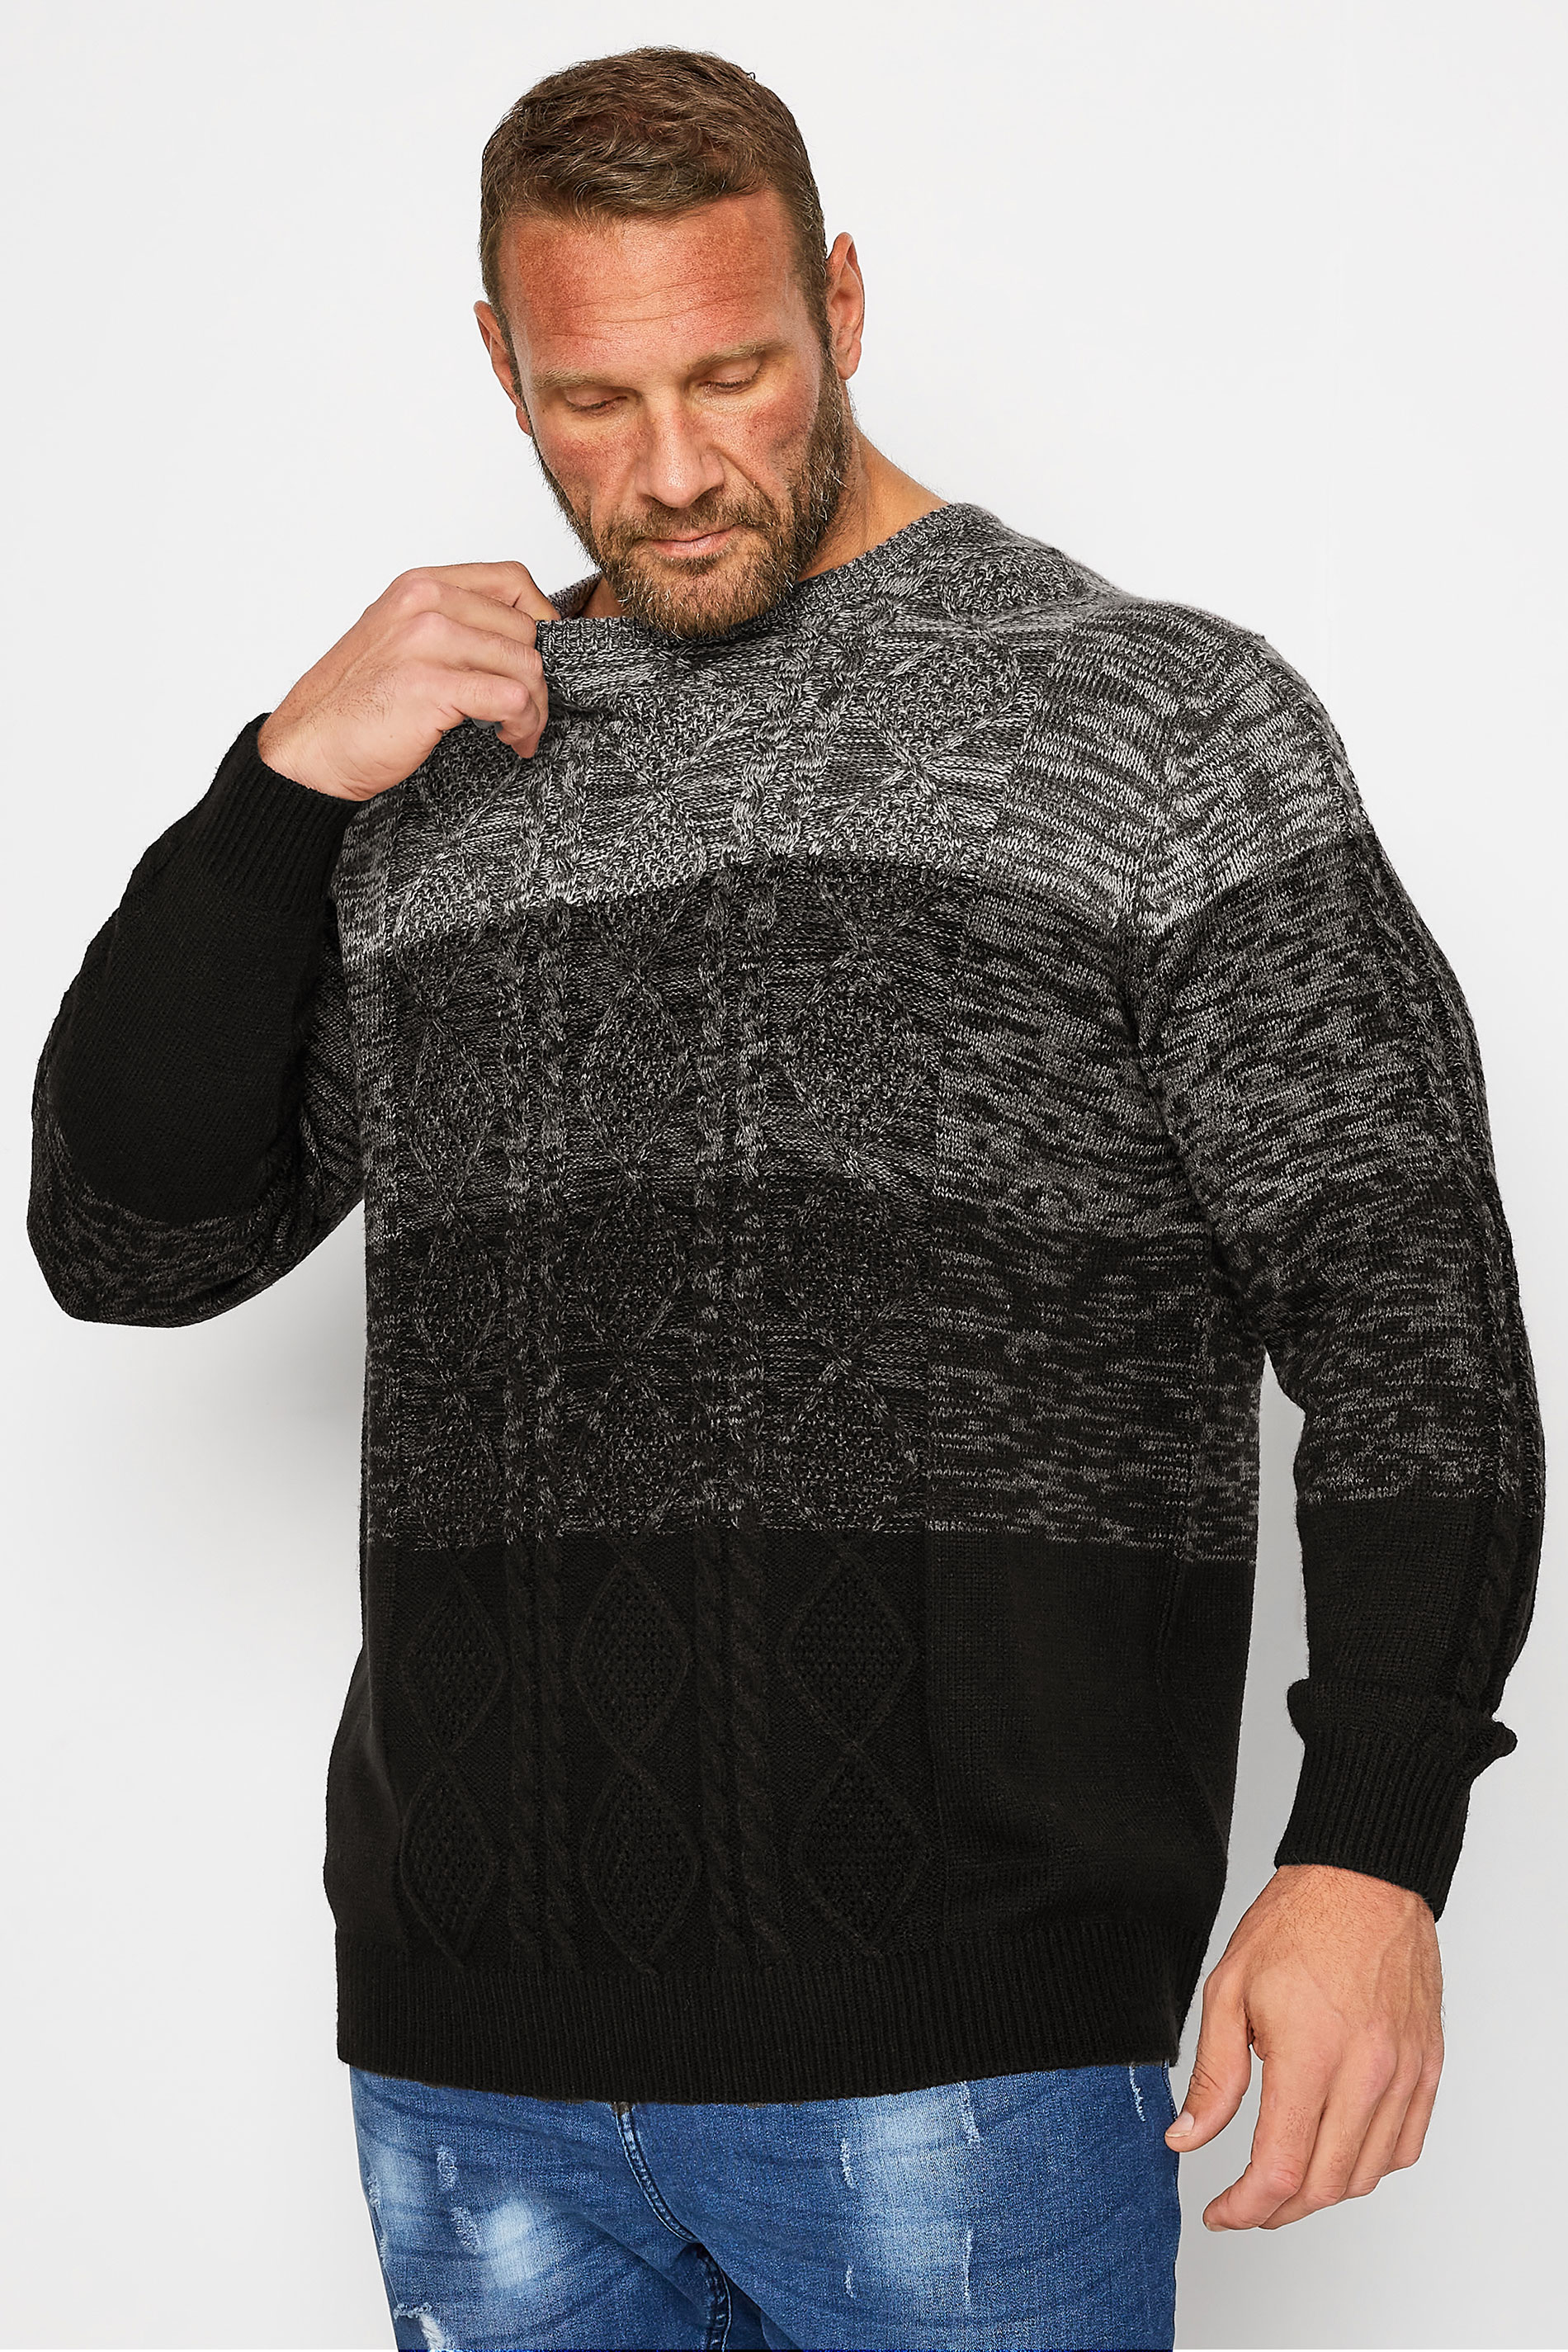 BadRhino Big & Tall Grey Colour Block Cable Knitted Jumper 1